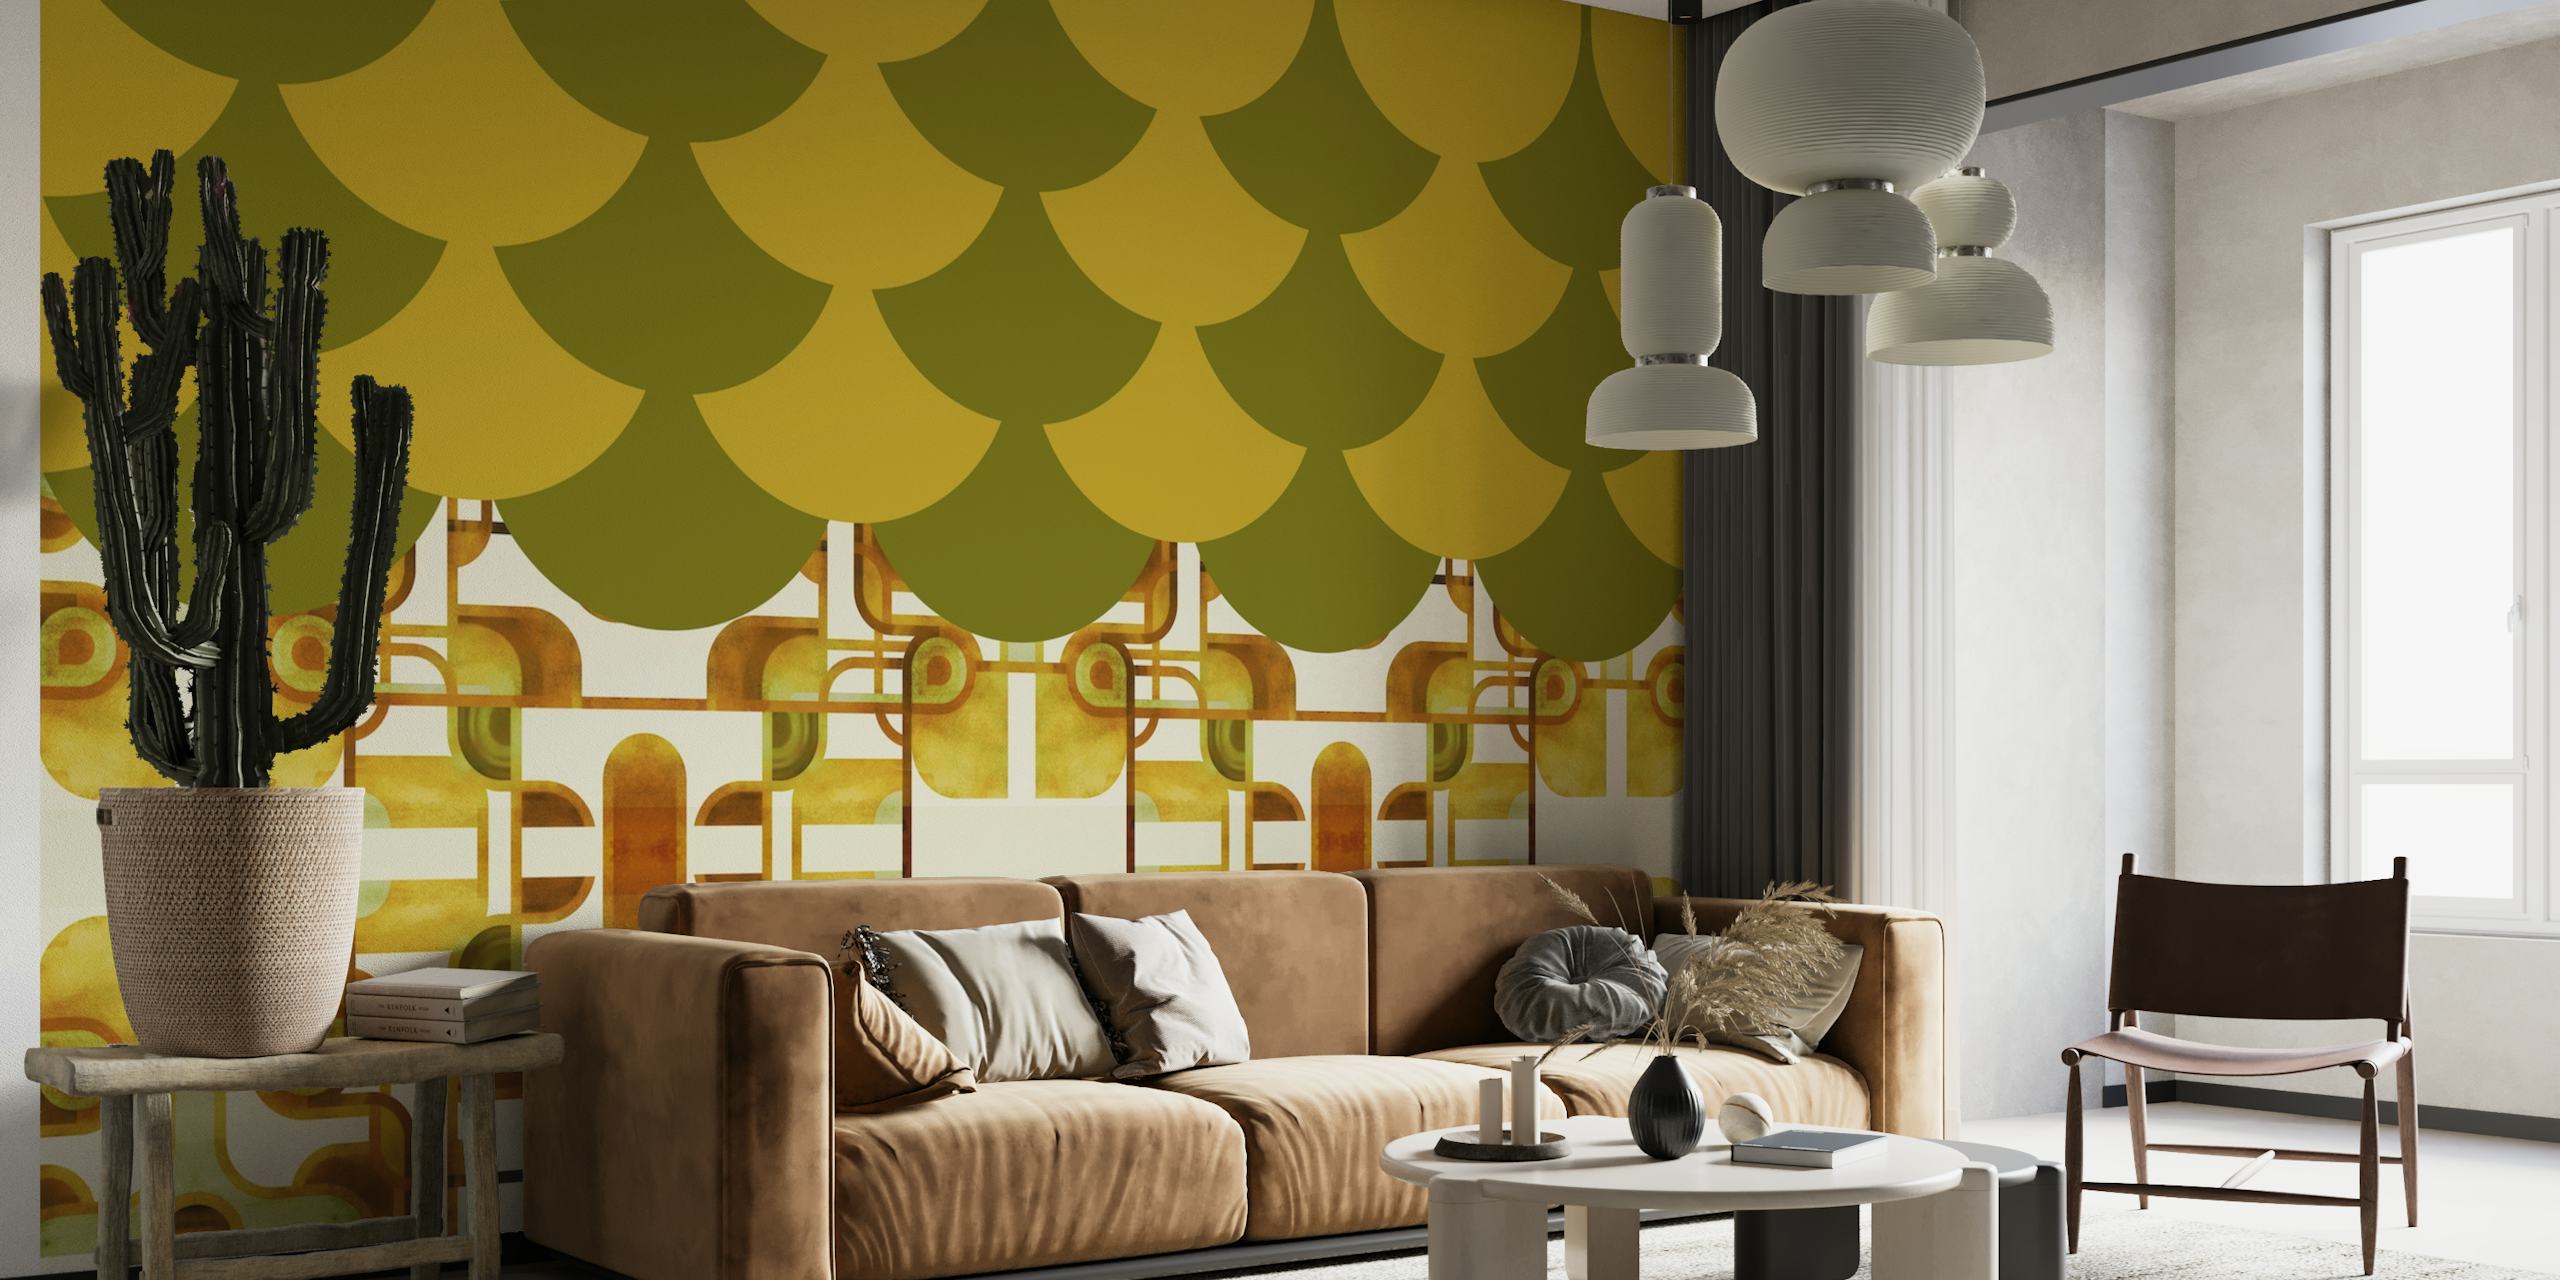 Crazy Art Deco wall mural with mustard, olive, and cream geometric patterns